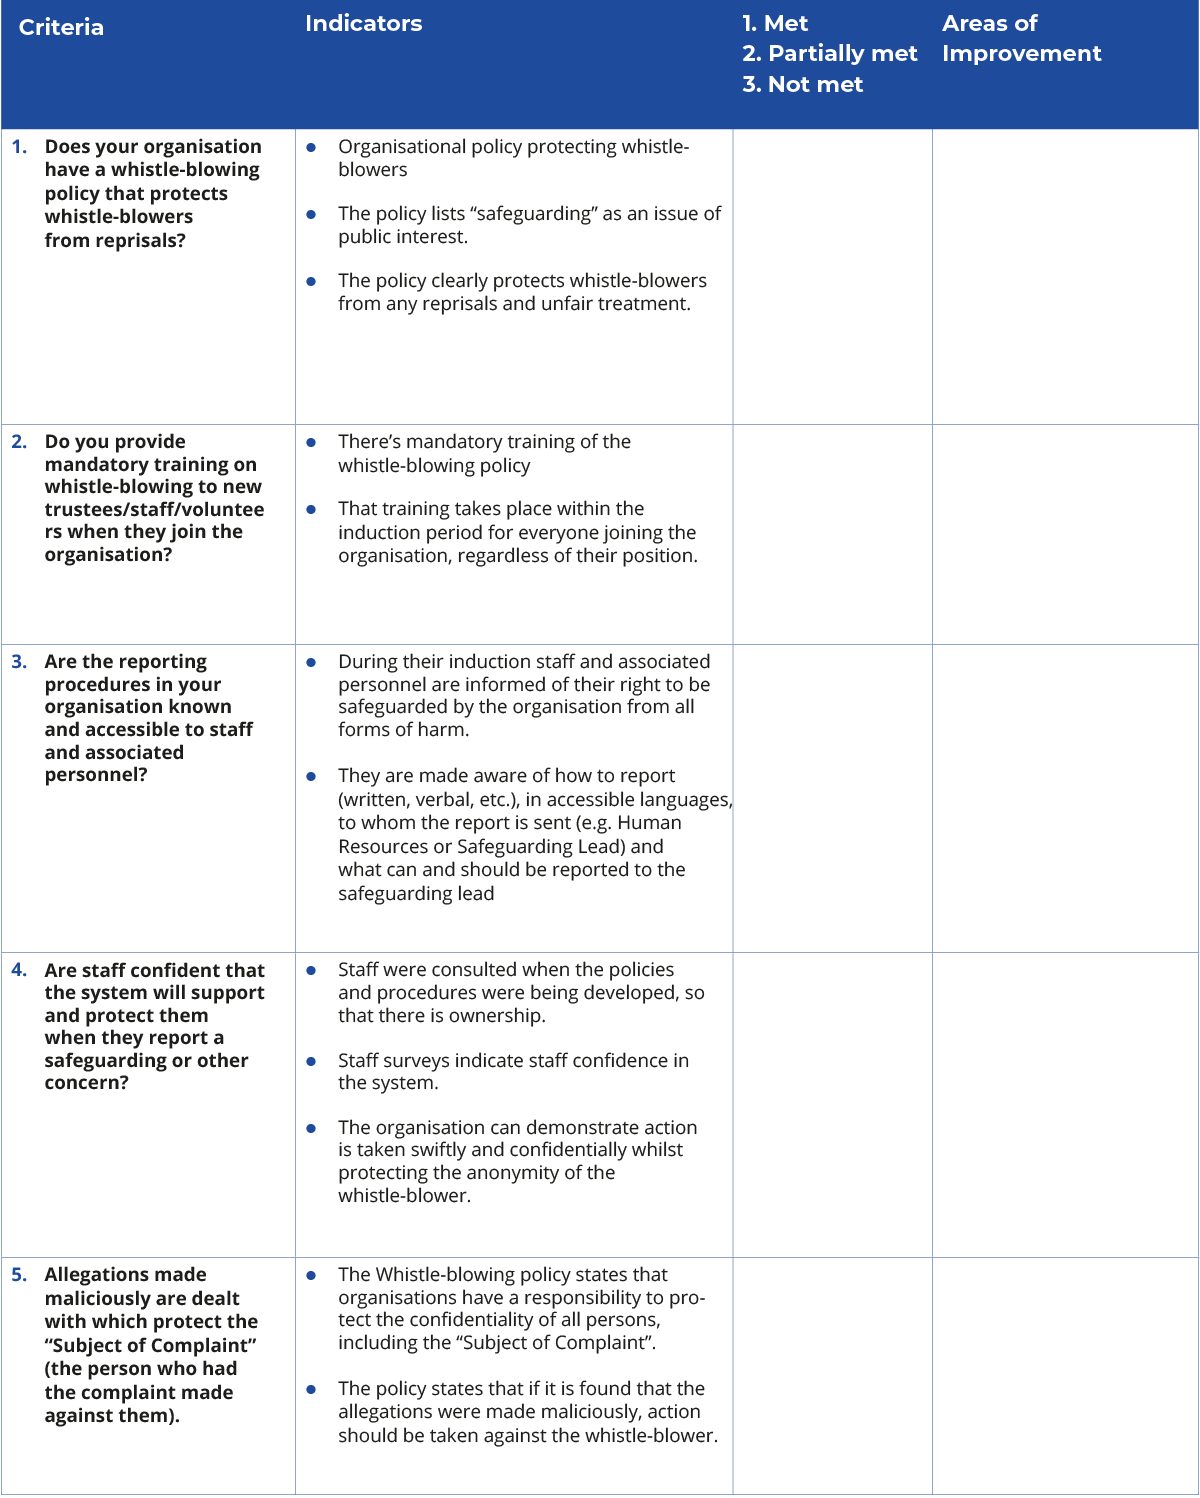 This is a table detailing a checklist on whistle-blower protection. There is an accessible PDF version of this table available in the downloads area.